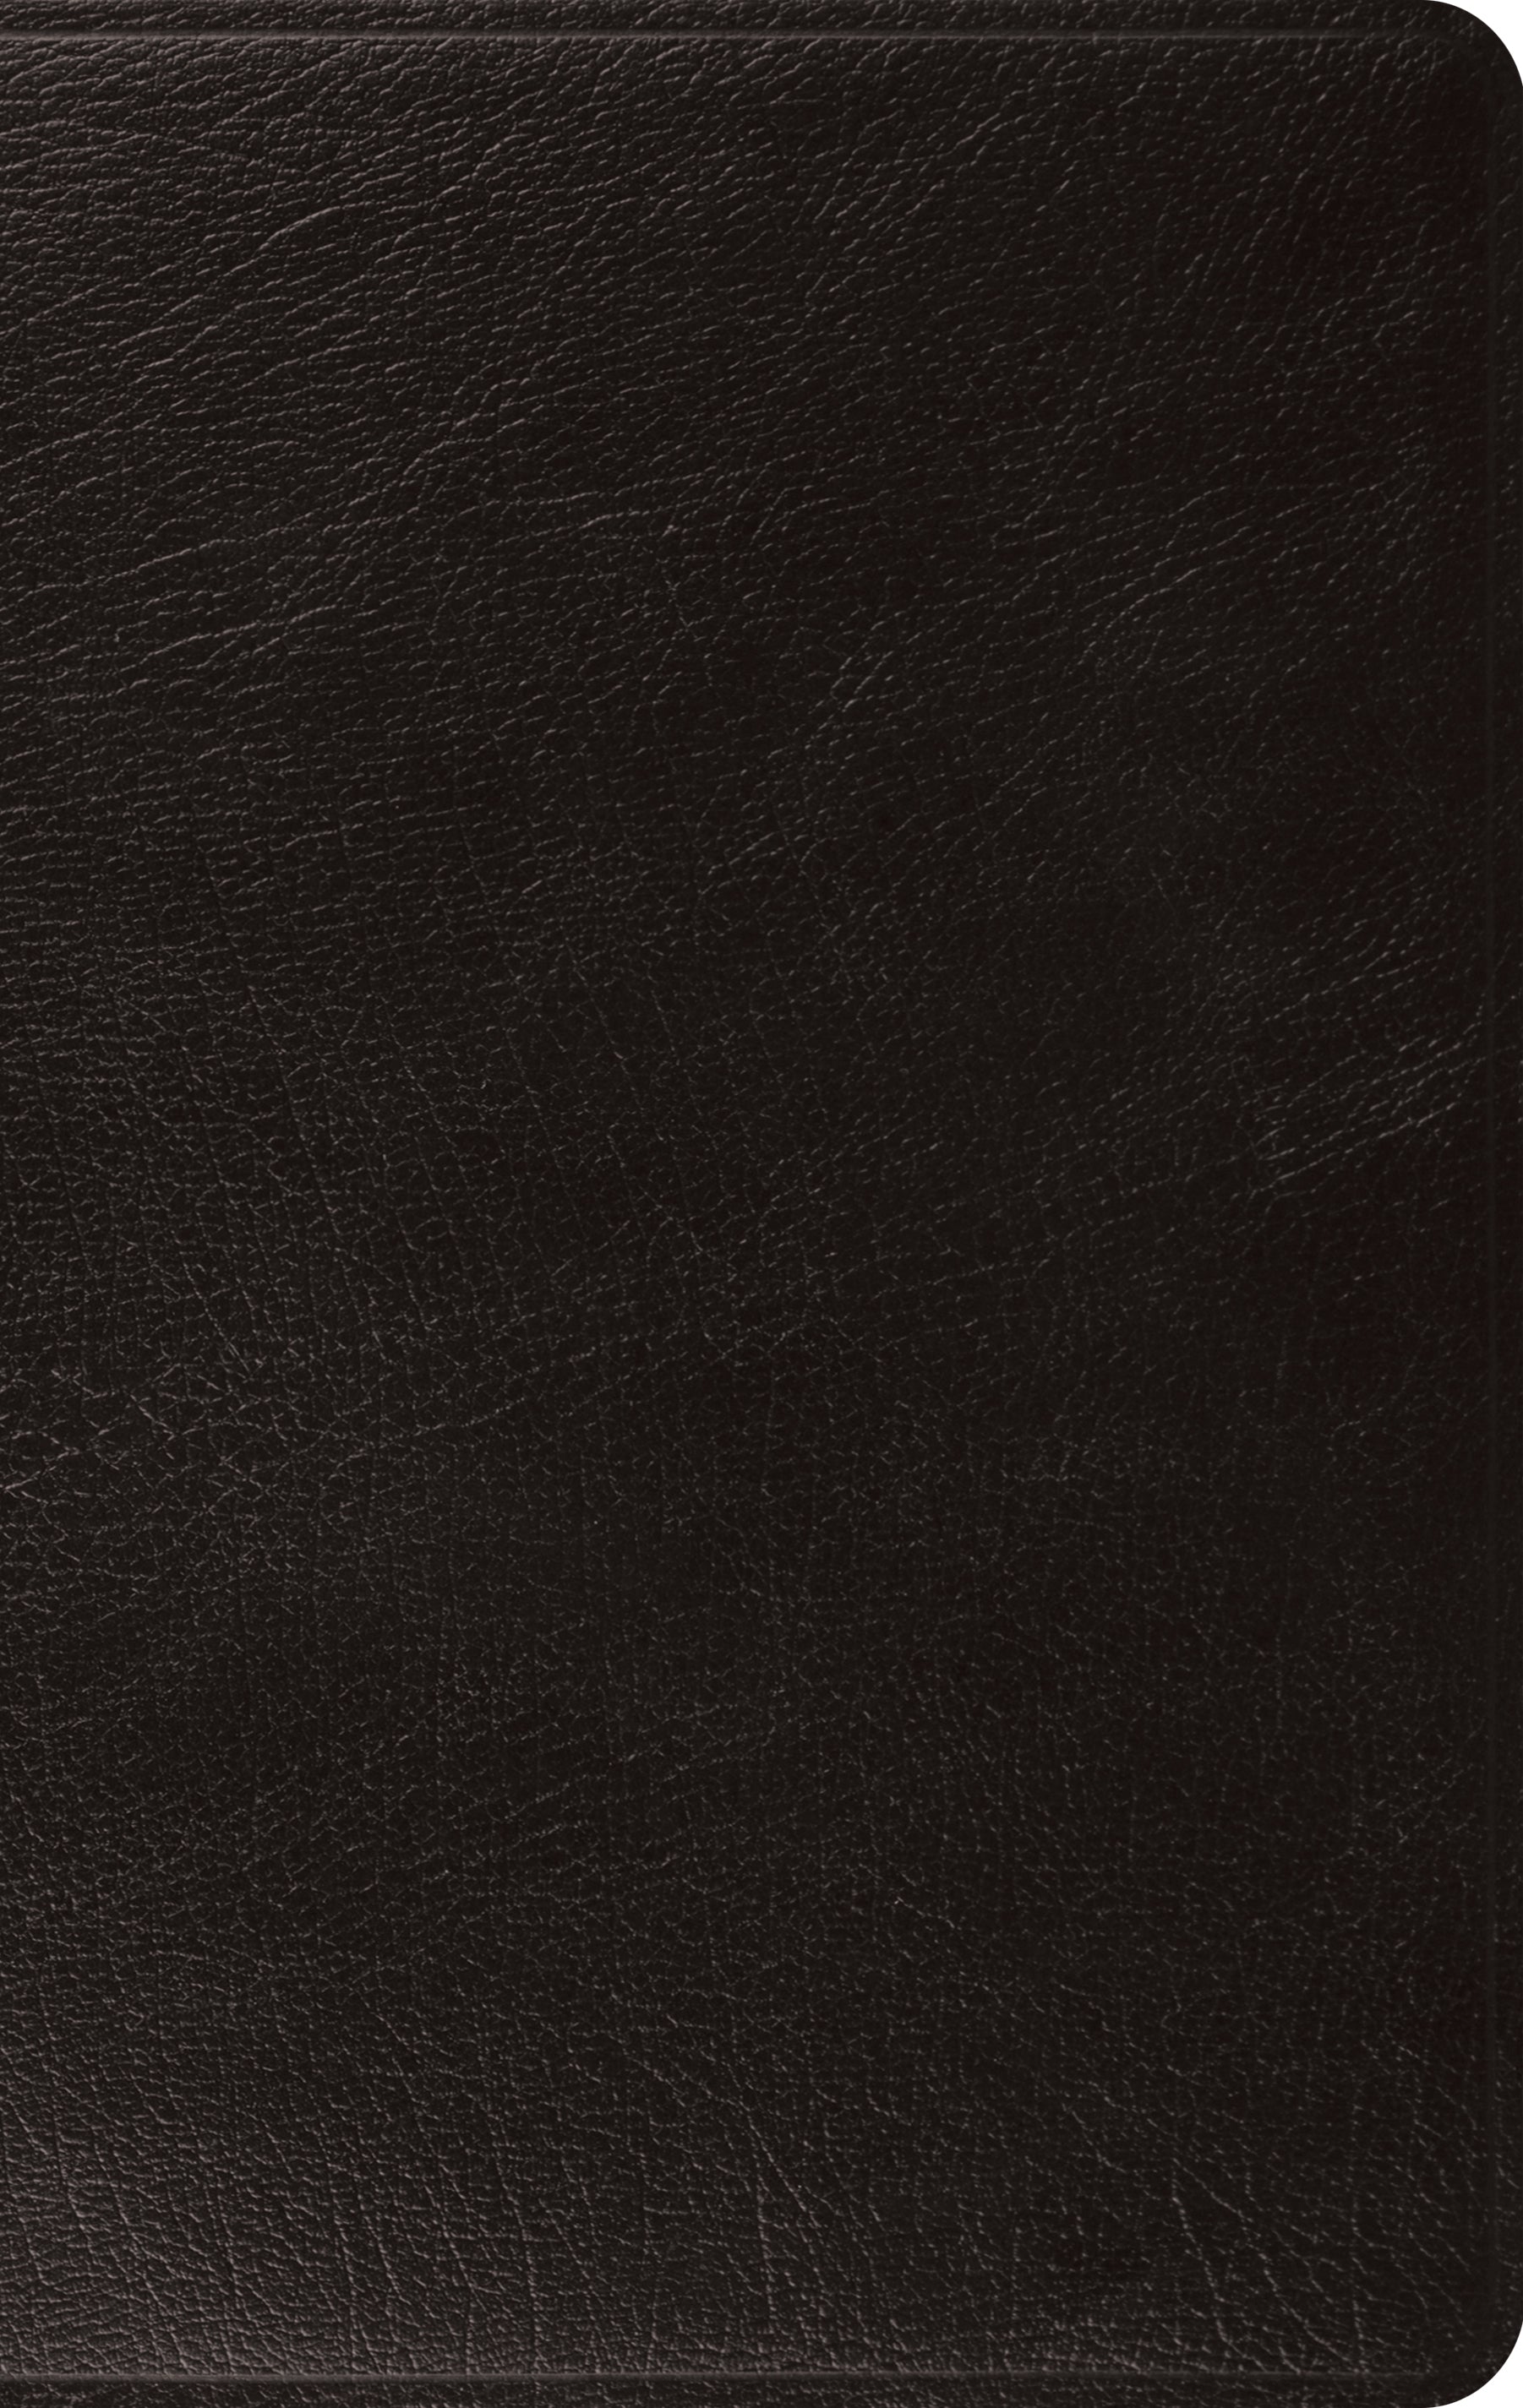 Image of ESV Large Print Thinline Bible (Black) other